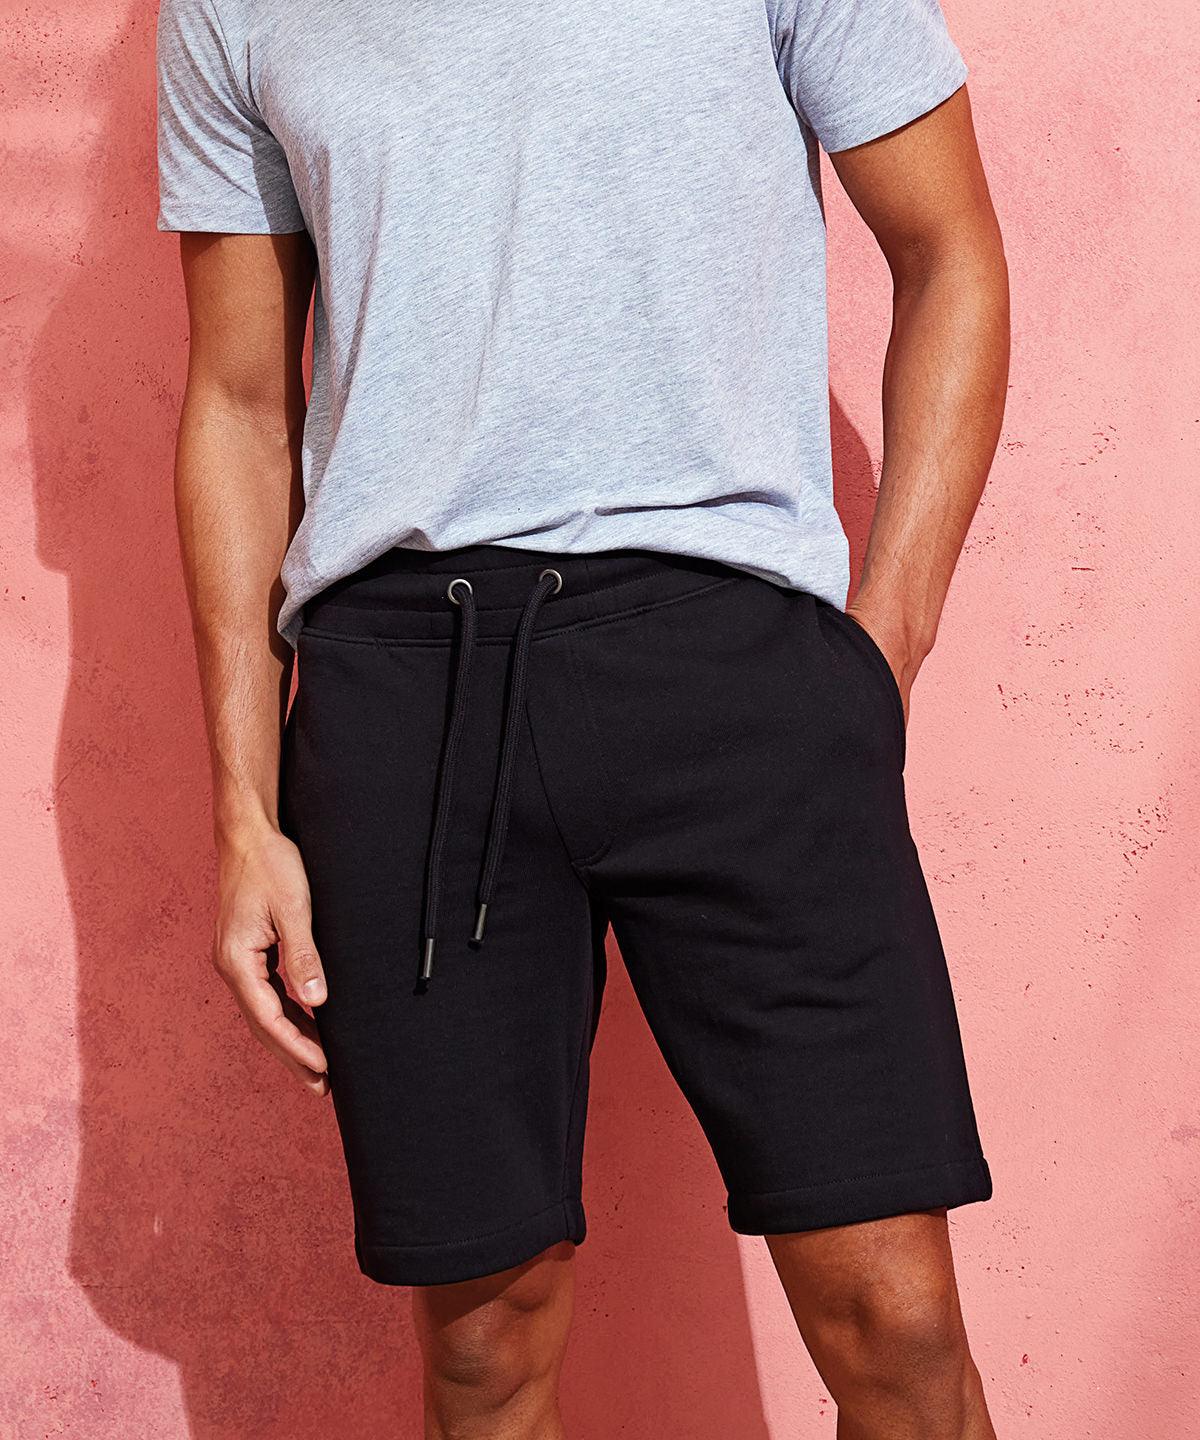 Heather Grey Melange - Men’s Recycled Jersey shorts Shorts Wombat New Styles for 2023, Organic & Conscious, Rebrandable, Trousers & Shorts Schoolwear Centres